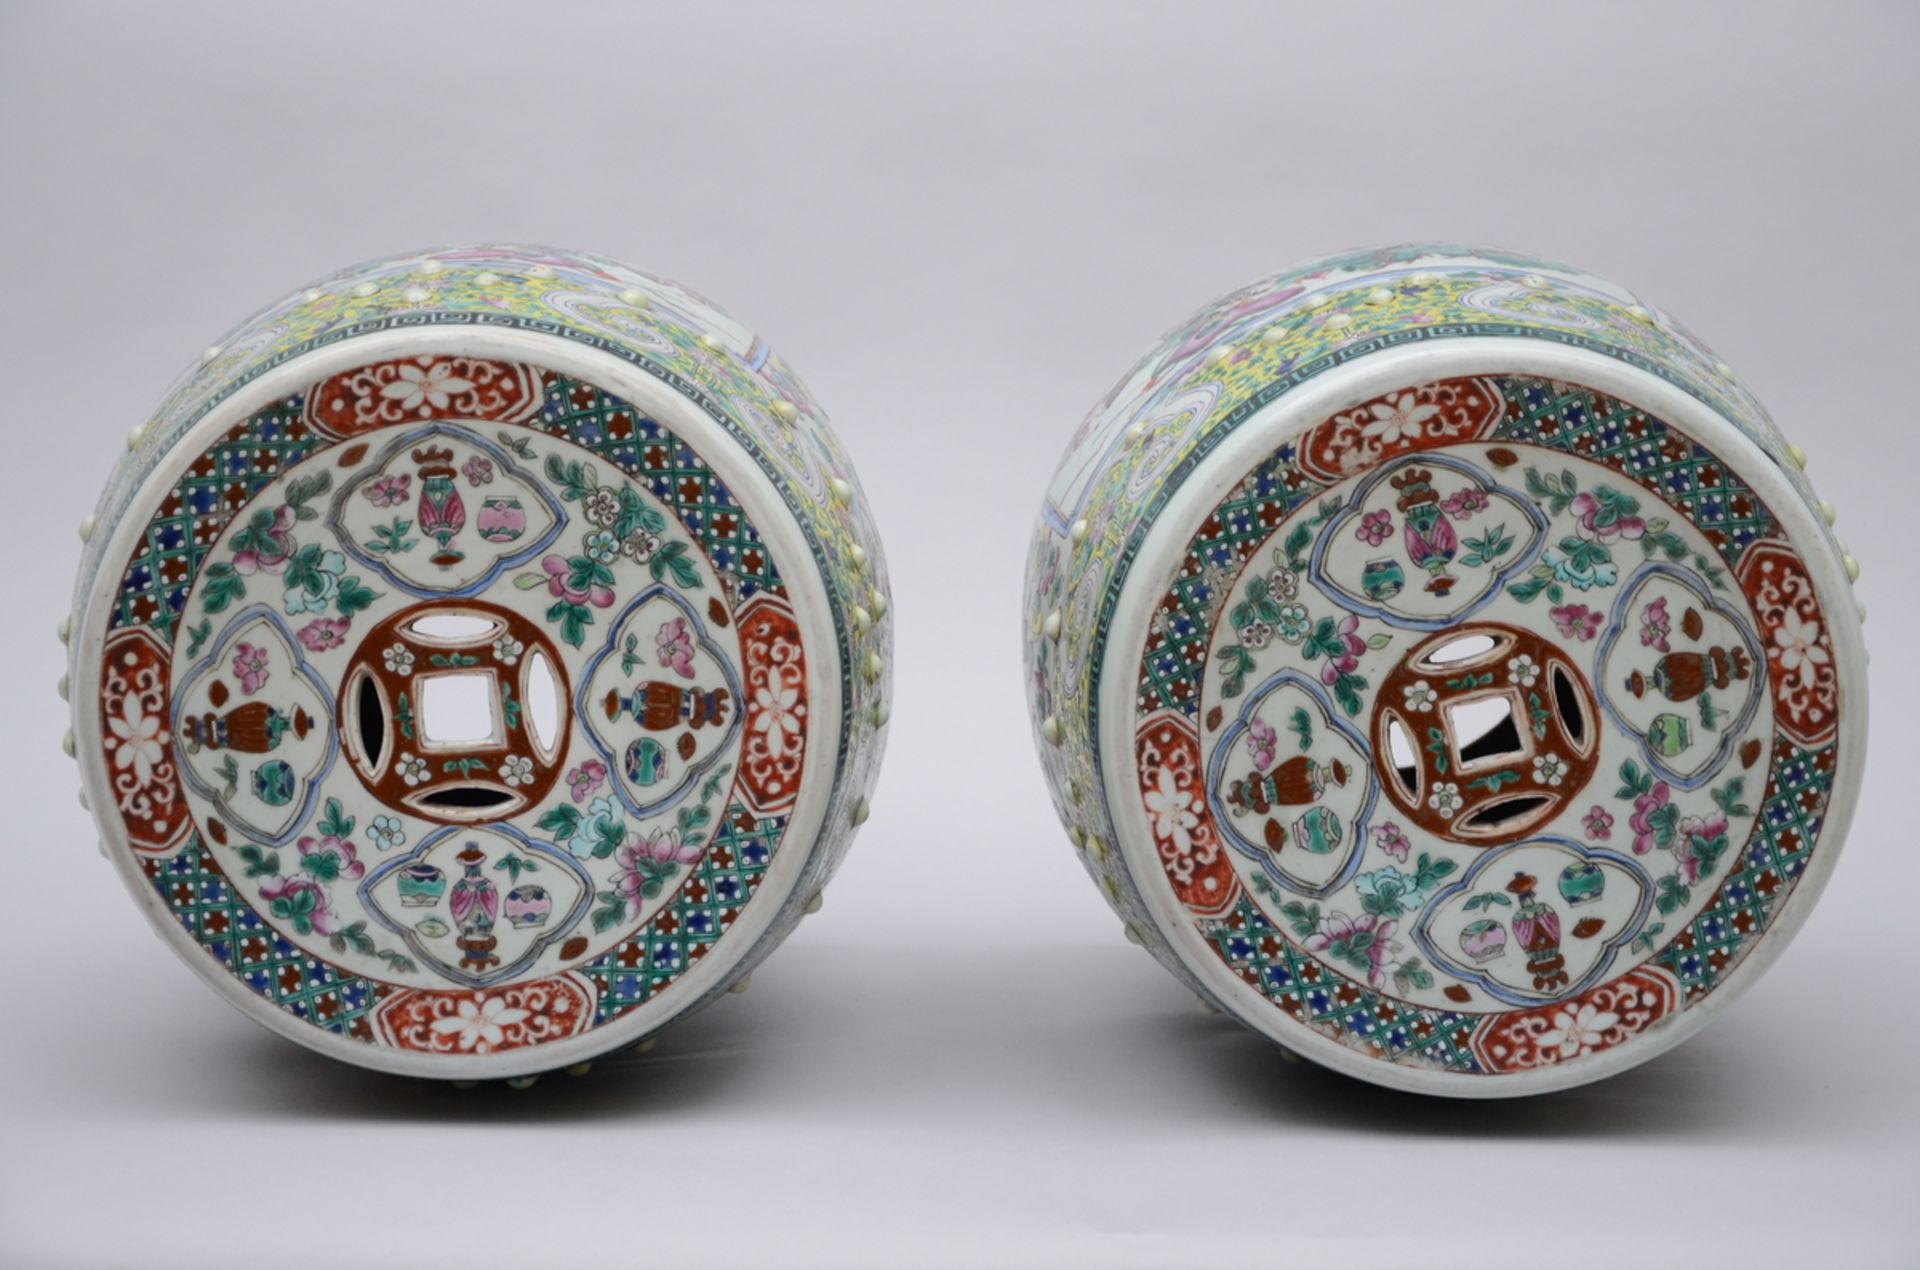 A pair of stools in Chinese famille rose porcelain 'warriors', 19th century (48x32 cm) (*) - Image 3 of 6